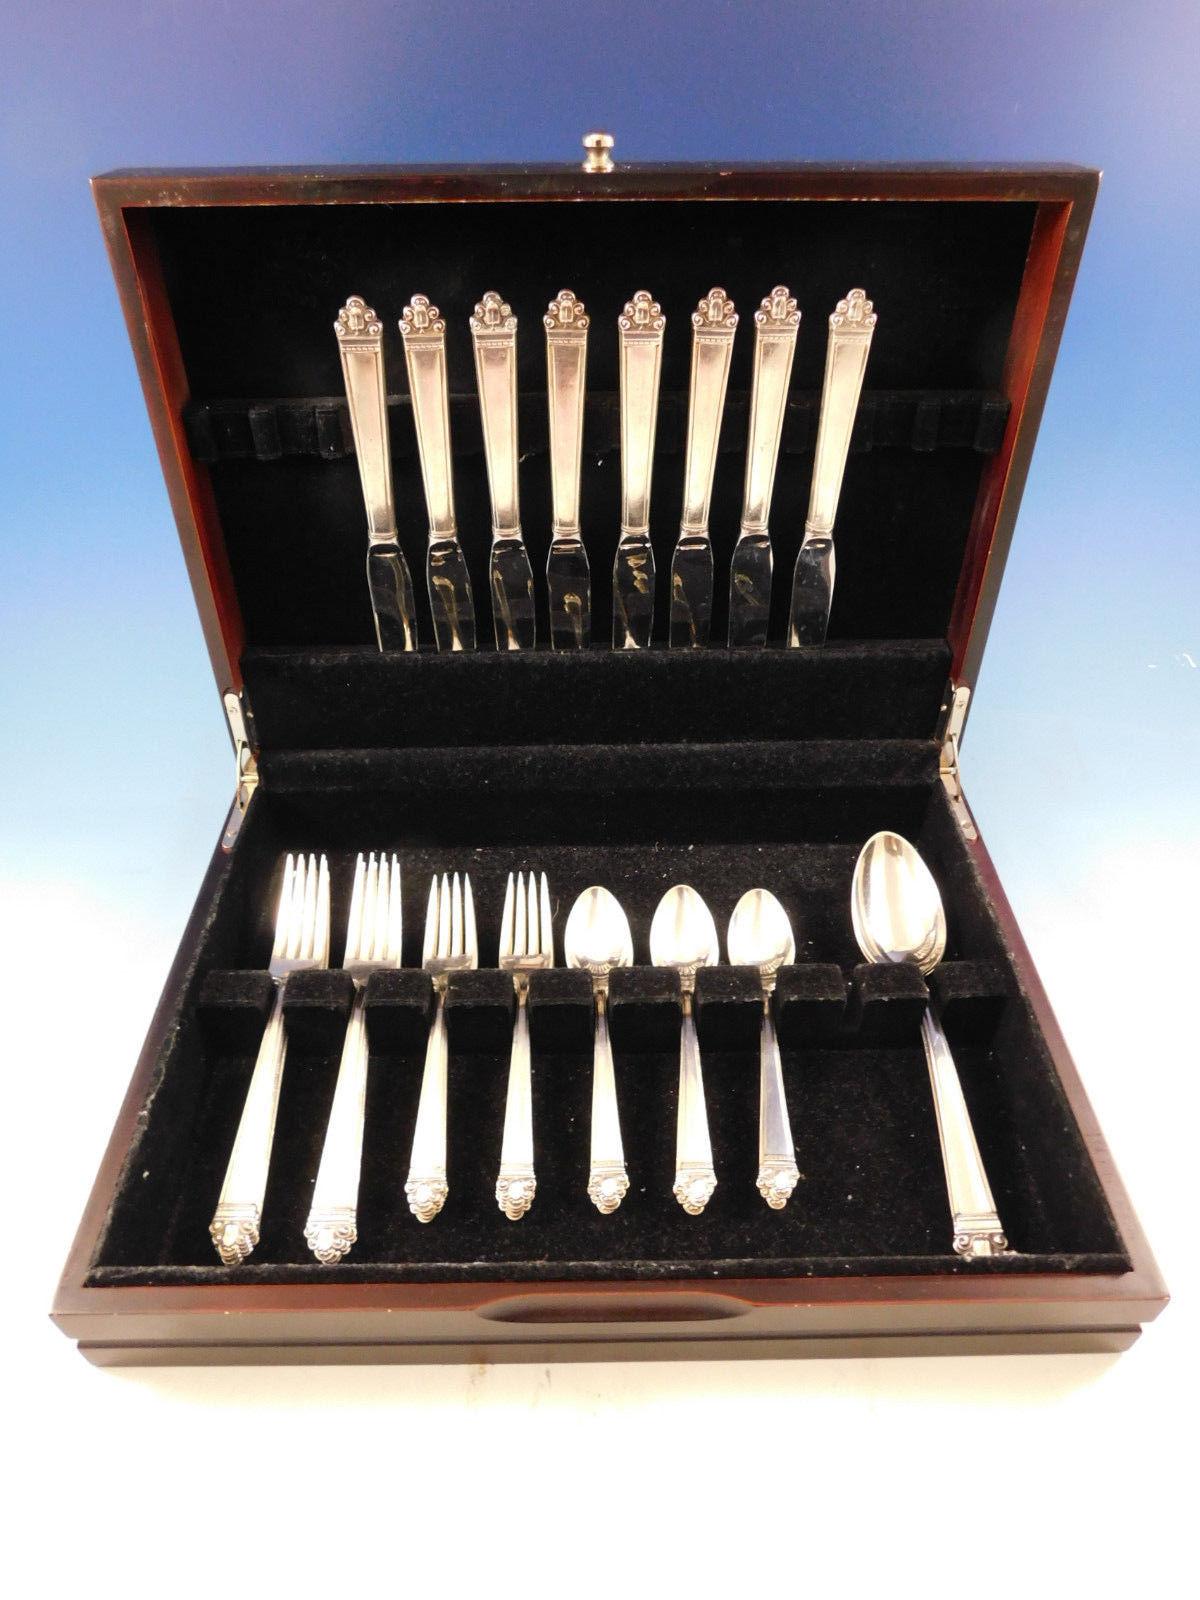 Juliana by Watson Sterling Silver flatware set - 34 pieces. This set includes:

8 knives, modern blades, 9